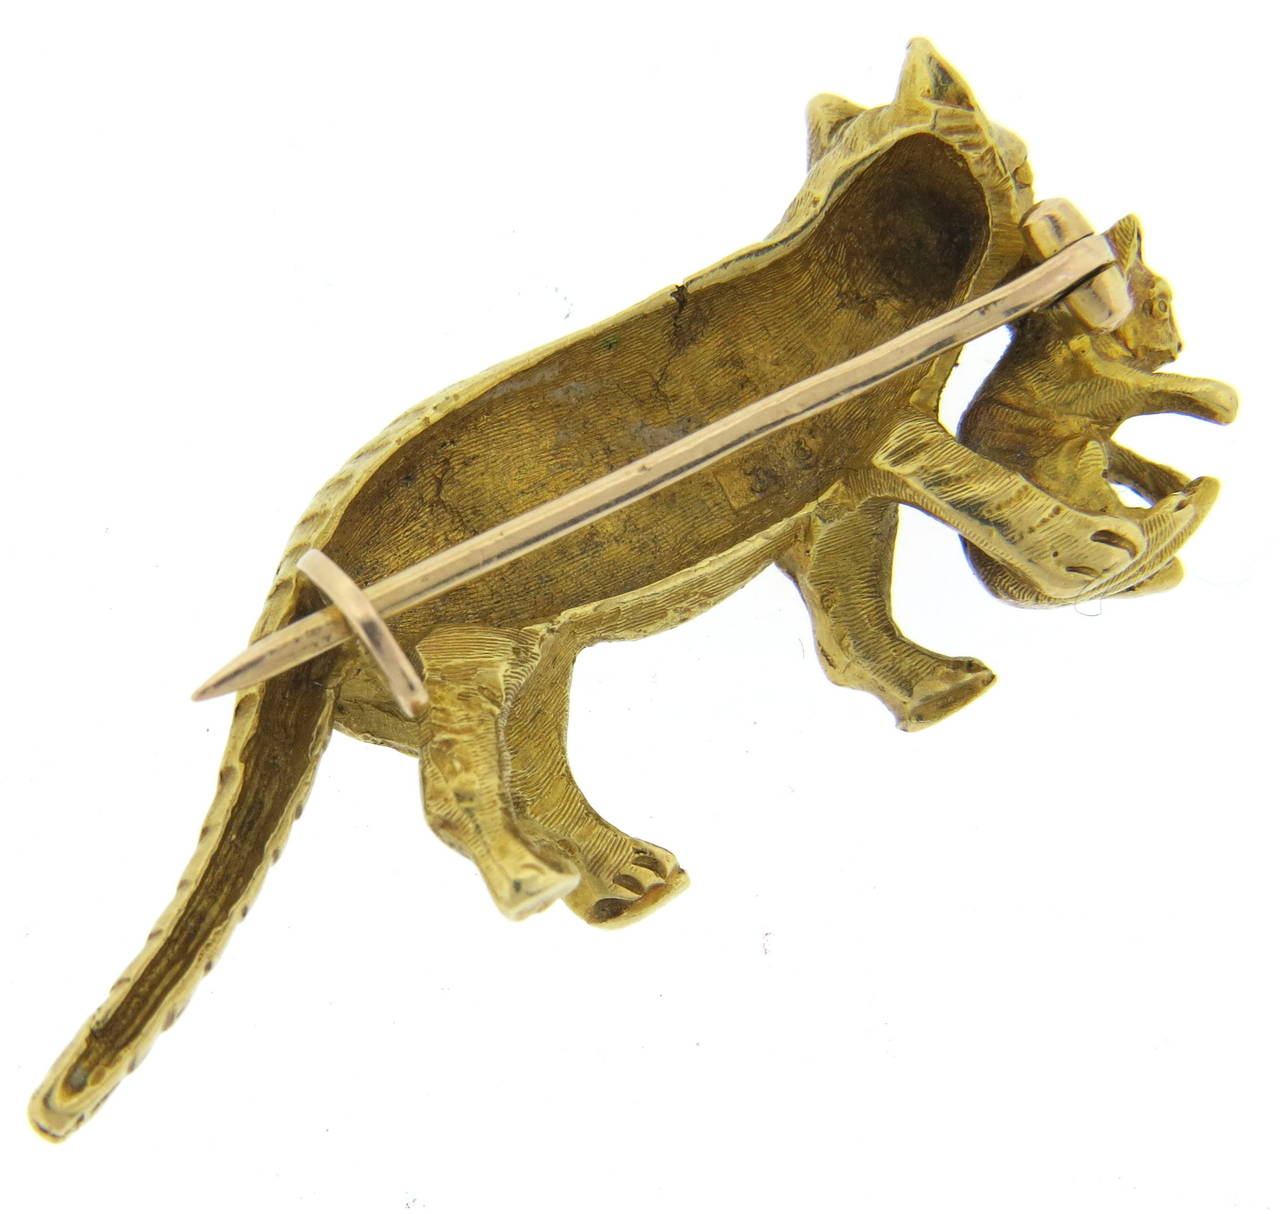 18k gold antique brooch pin, depicting cat and a kitten, measuring 42mm incl. the tail x 16mm. Weight of the piece - 11.2gr